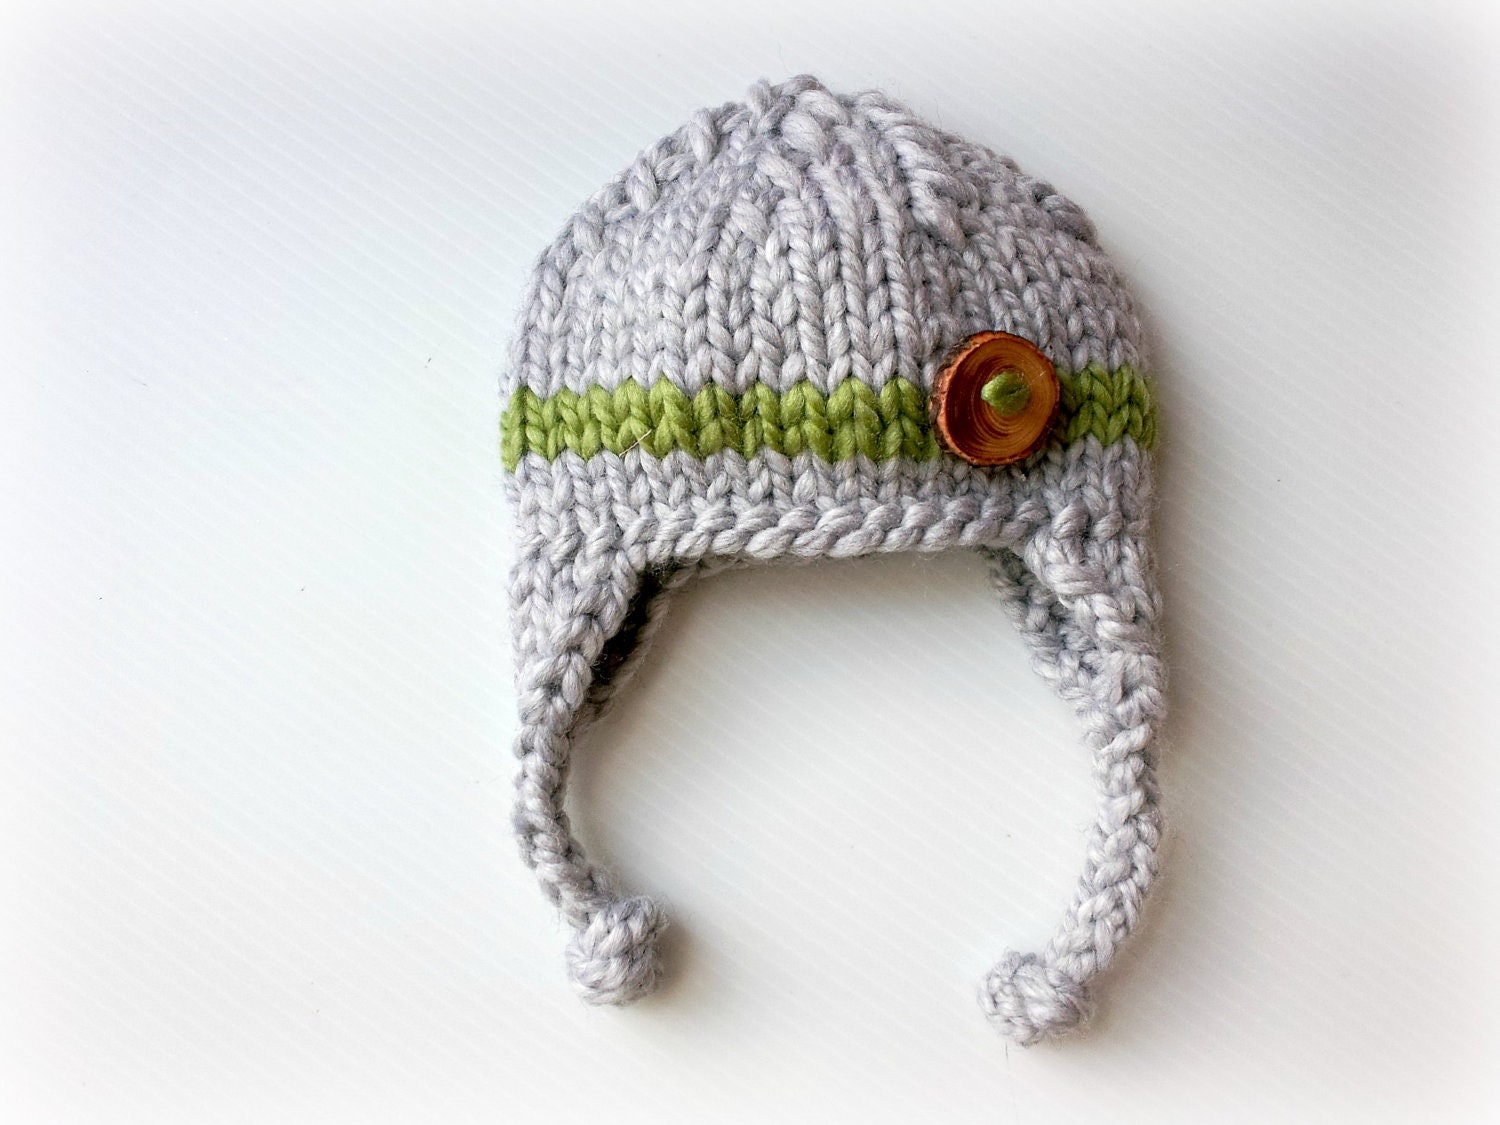 gray green stripe baby boy knitted hat, newborn photography prop, baby shower gift, baby photo prop, infant earflap beanie - PreciousLittleBaby